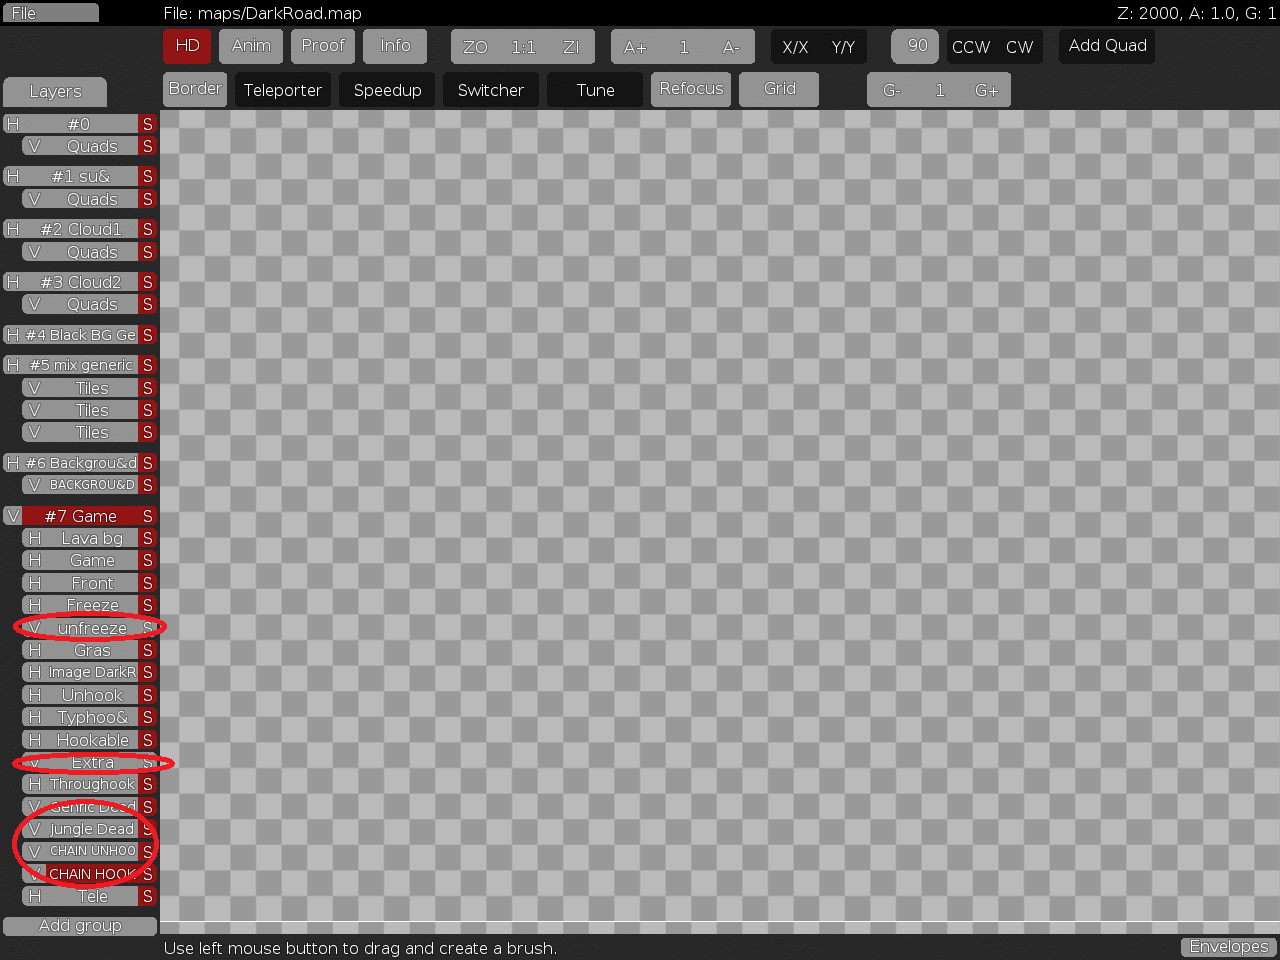 These layers are empty? O.o